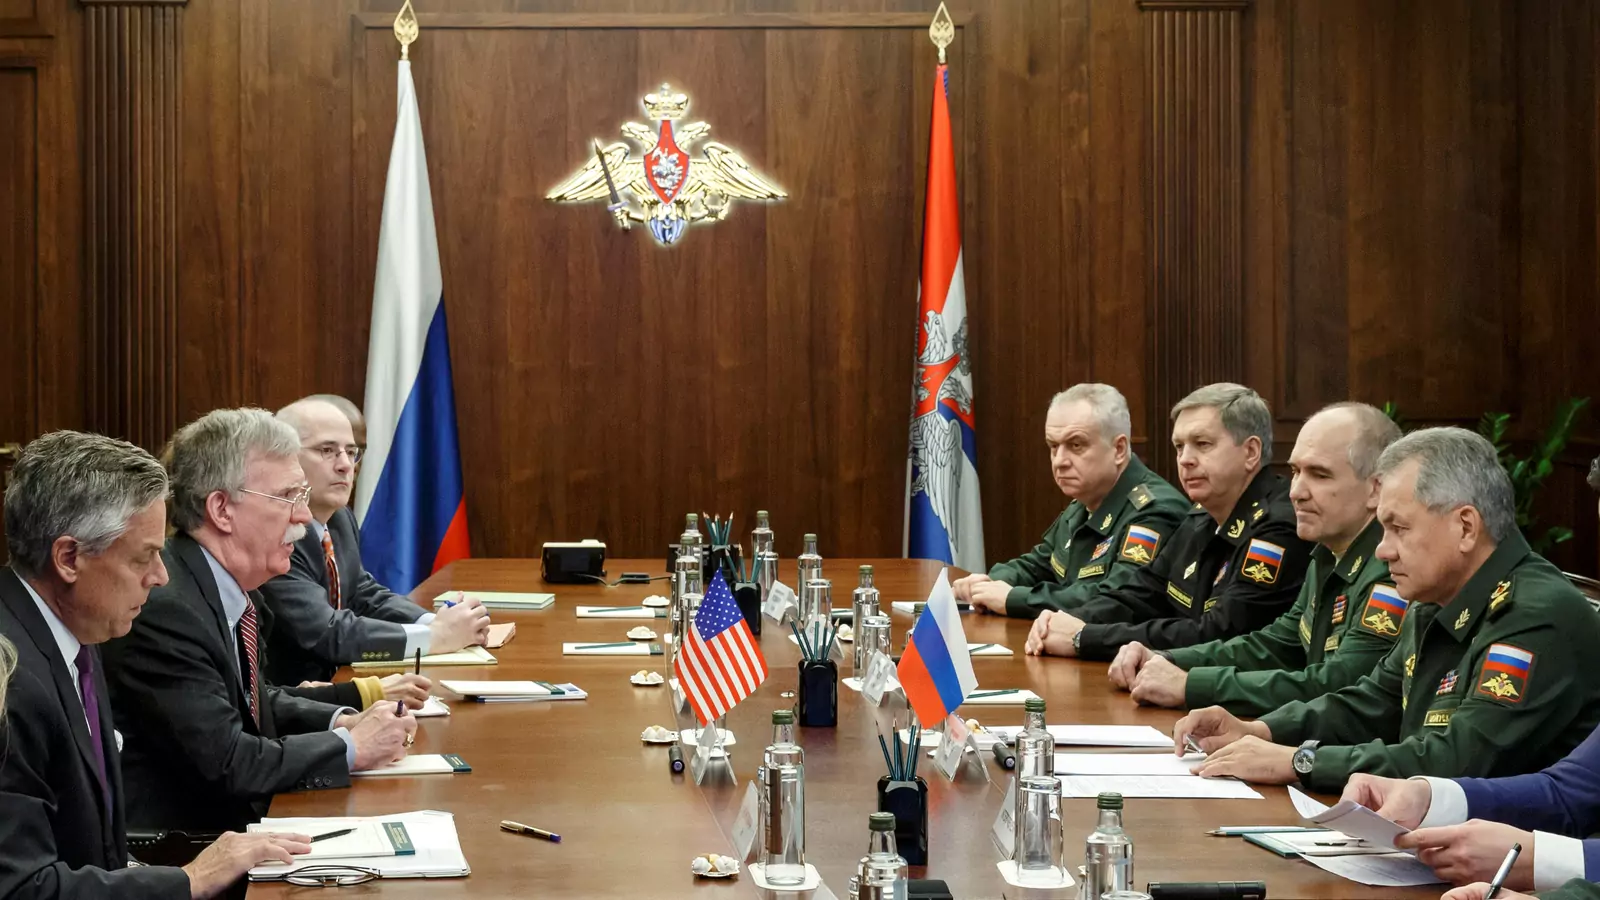 Delegations, led by Russia's Defence Minister Sergei Shoigu (R) and U.S. National Security Adviser John Bolton (2nd L), meet in Moscow, Russia October 23, 2018.